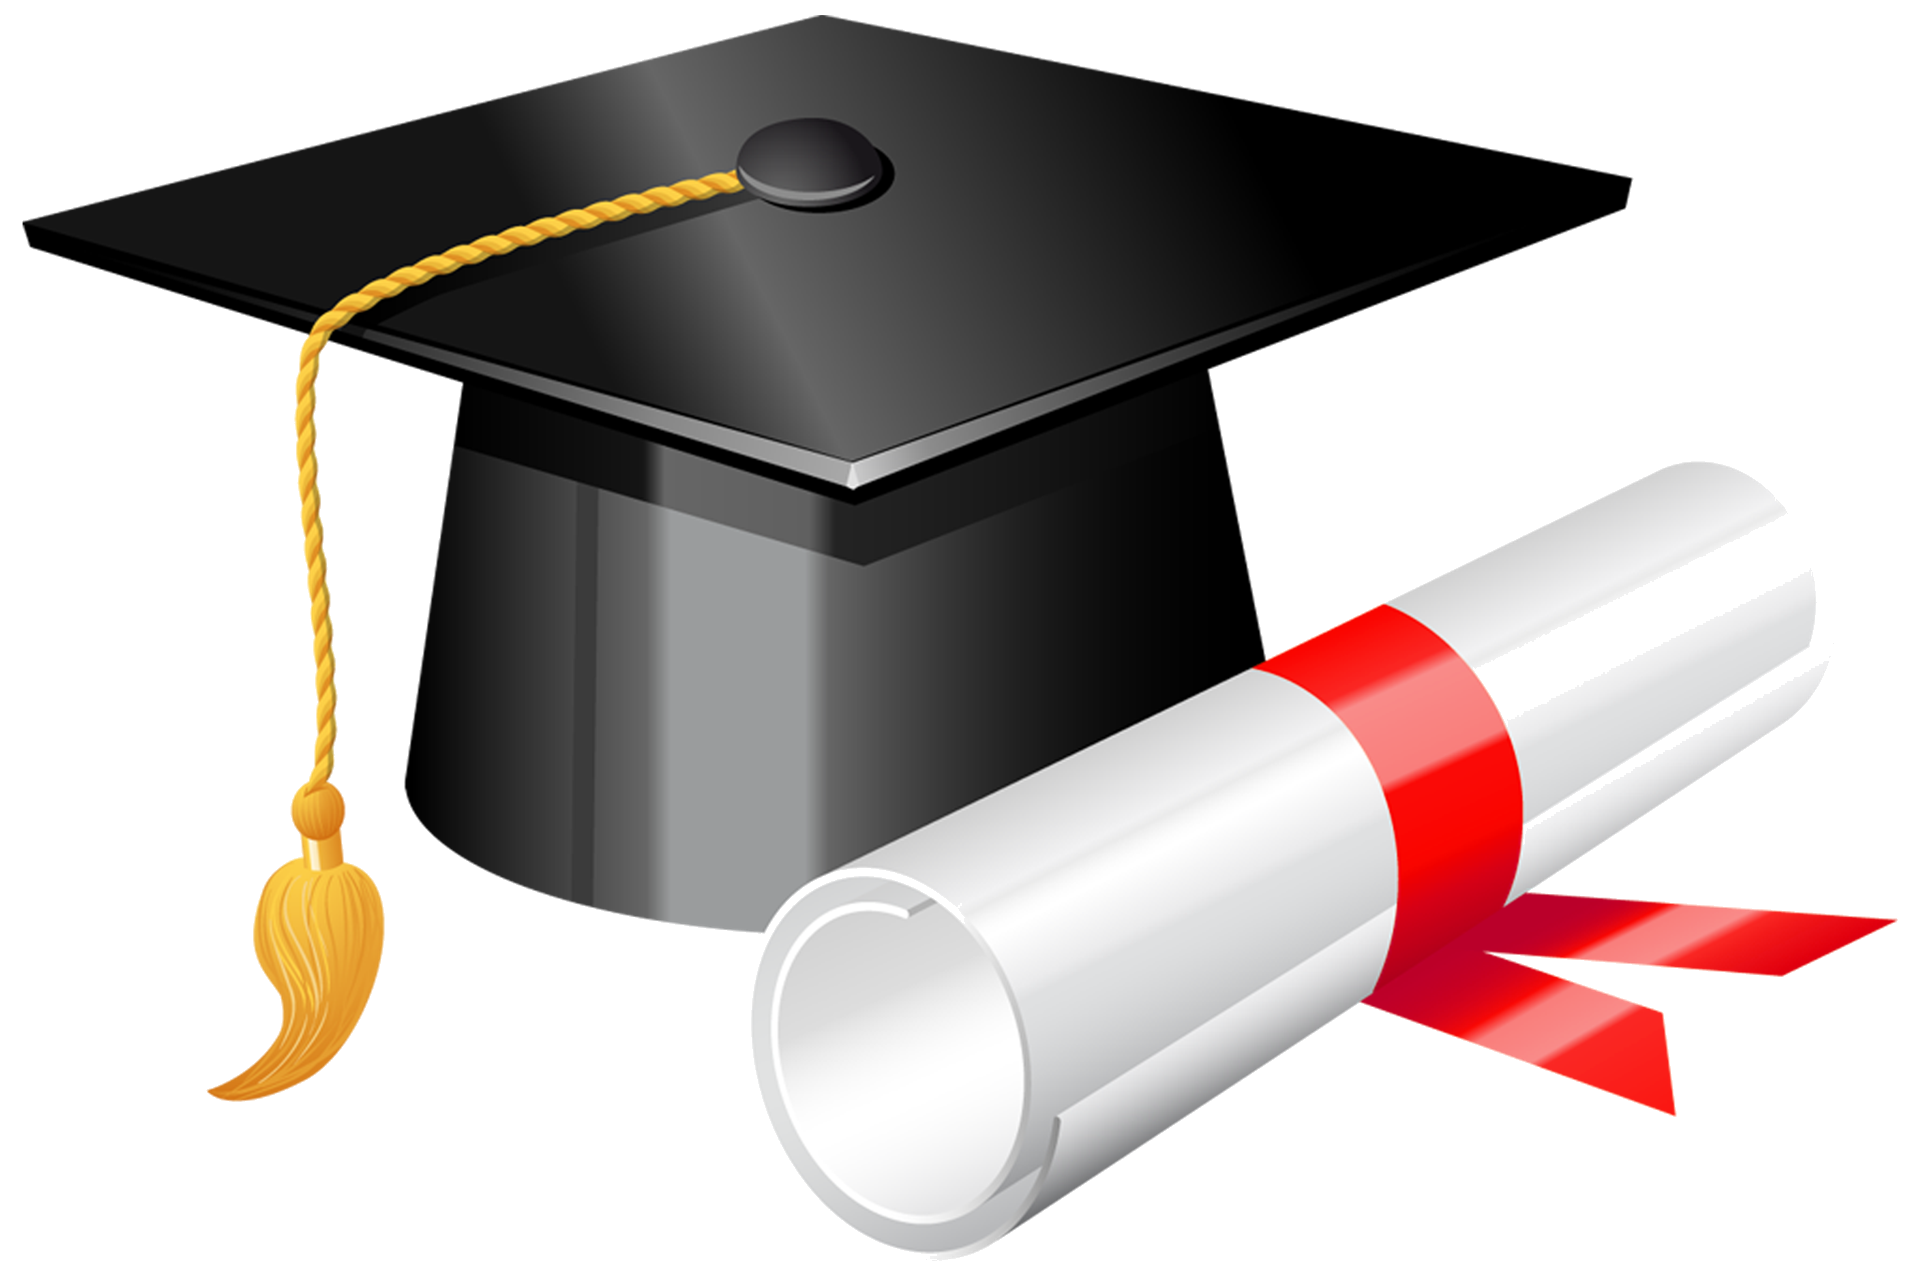 Diploma clipart high school, Diploma high school Transparent FREE for